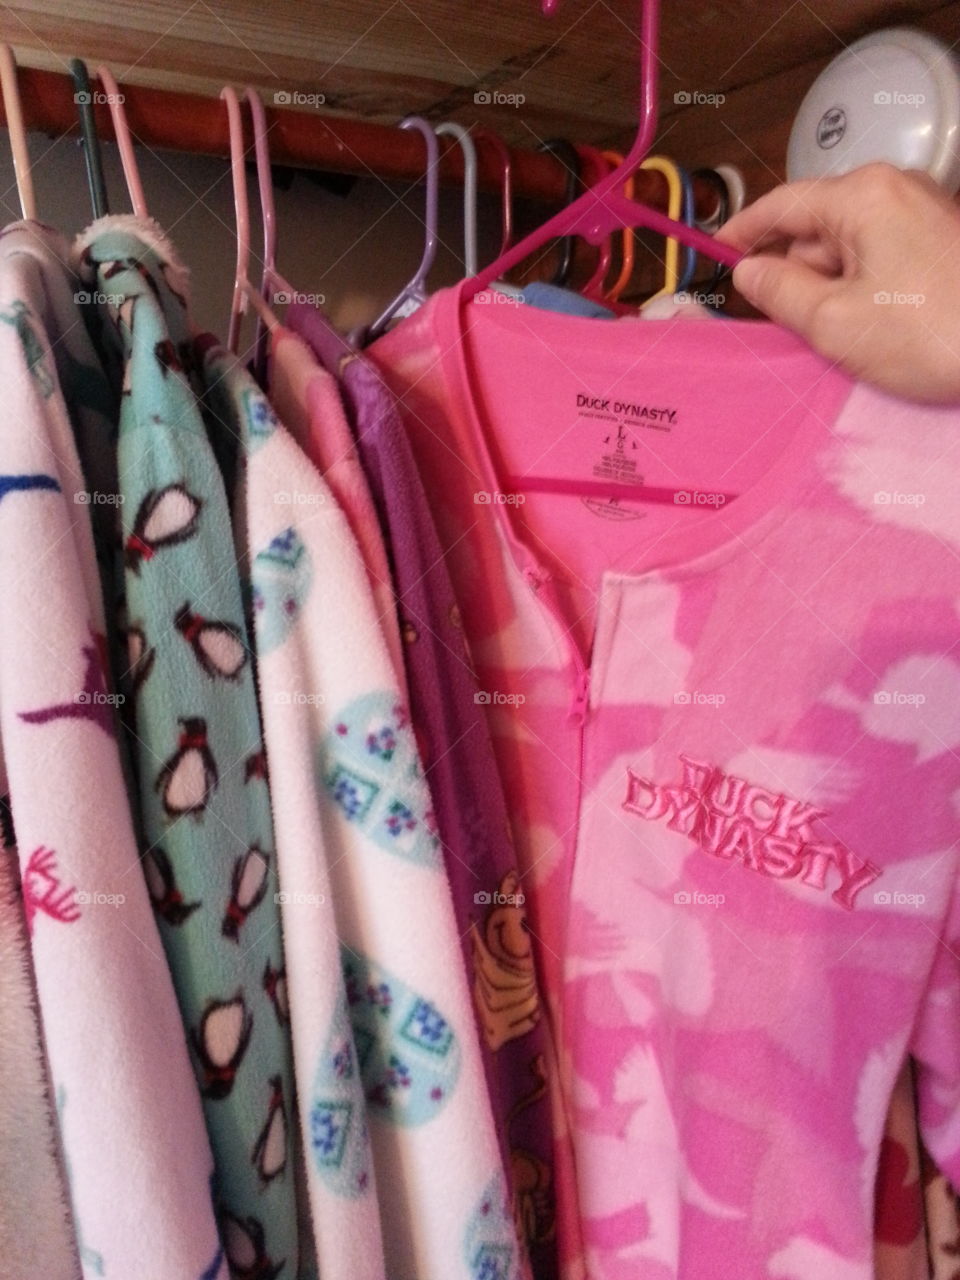 Hanging up pink Duck Dynasty Pj's. Hanging up laundry